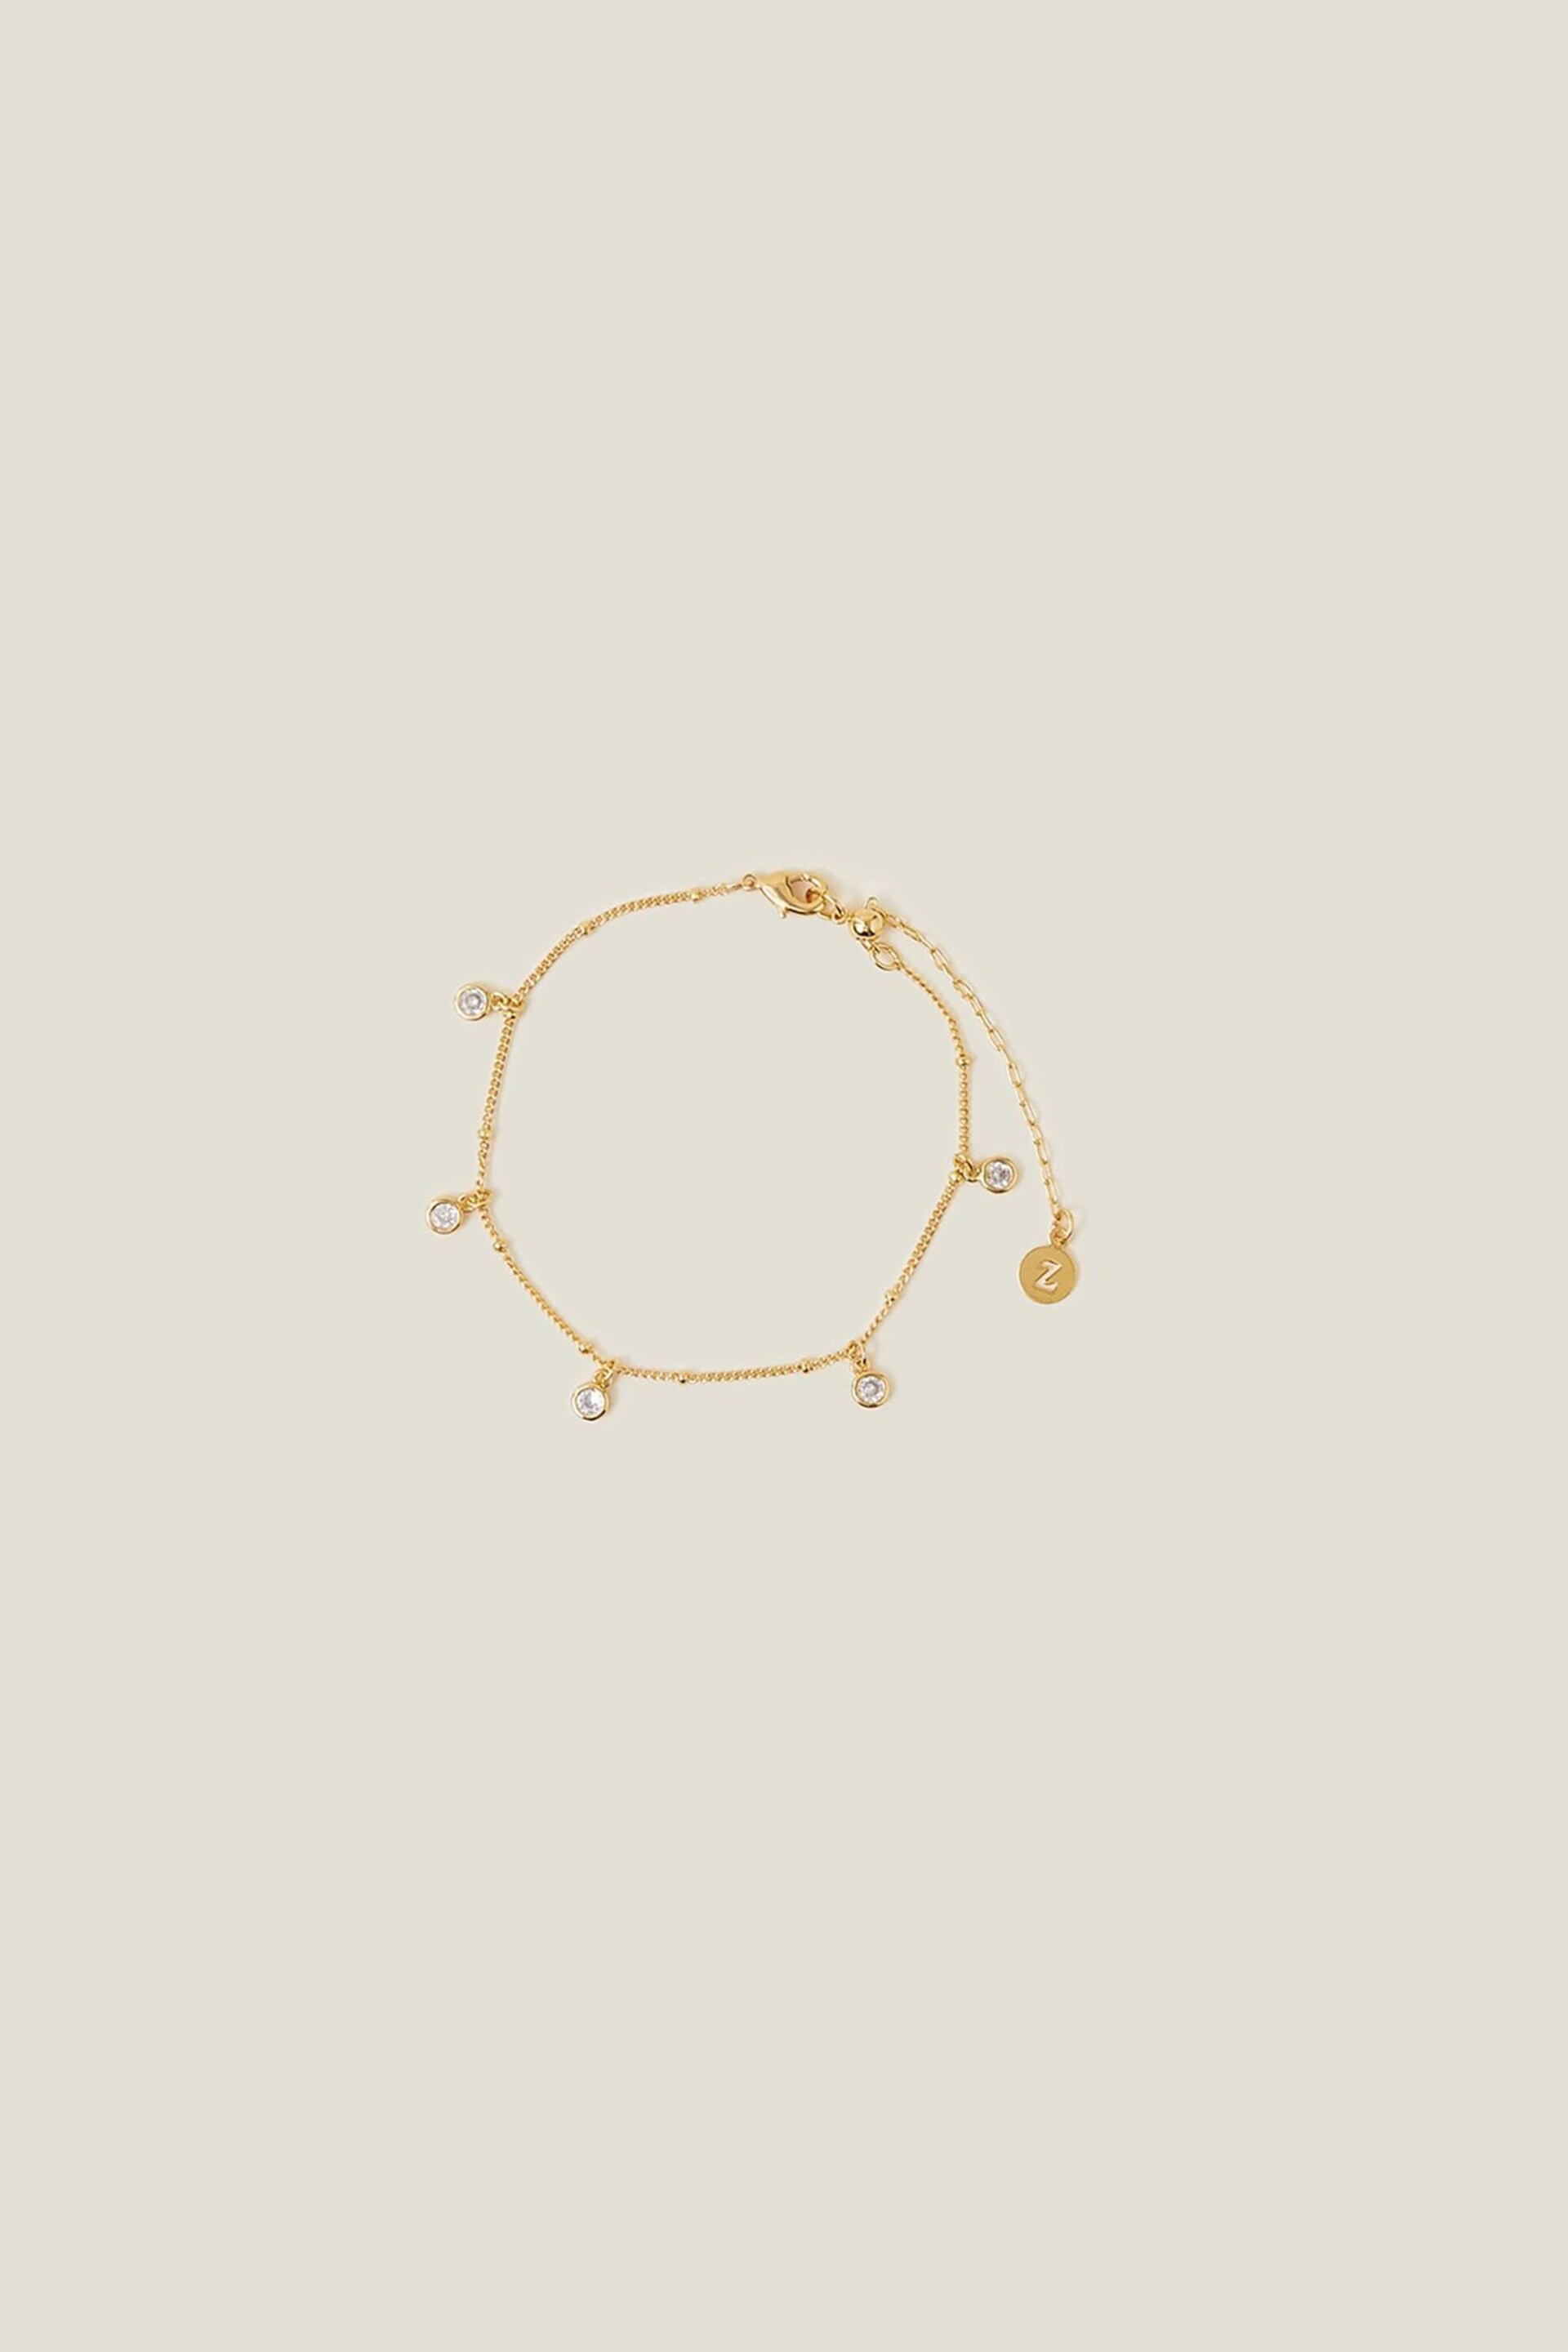 Accessorize 14ct Gold Plated Crystal Station Bracelet - Image 1 of 3